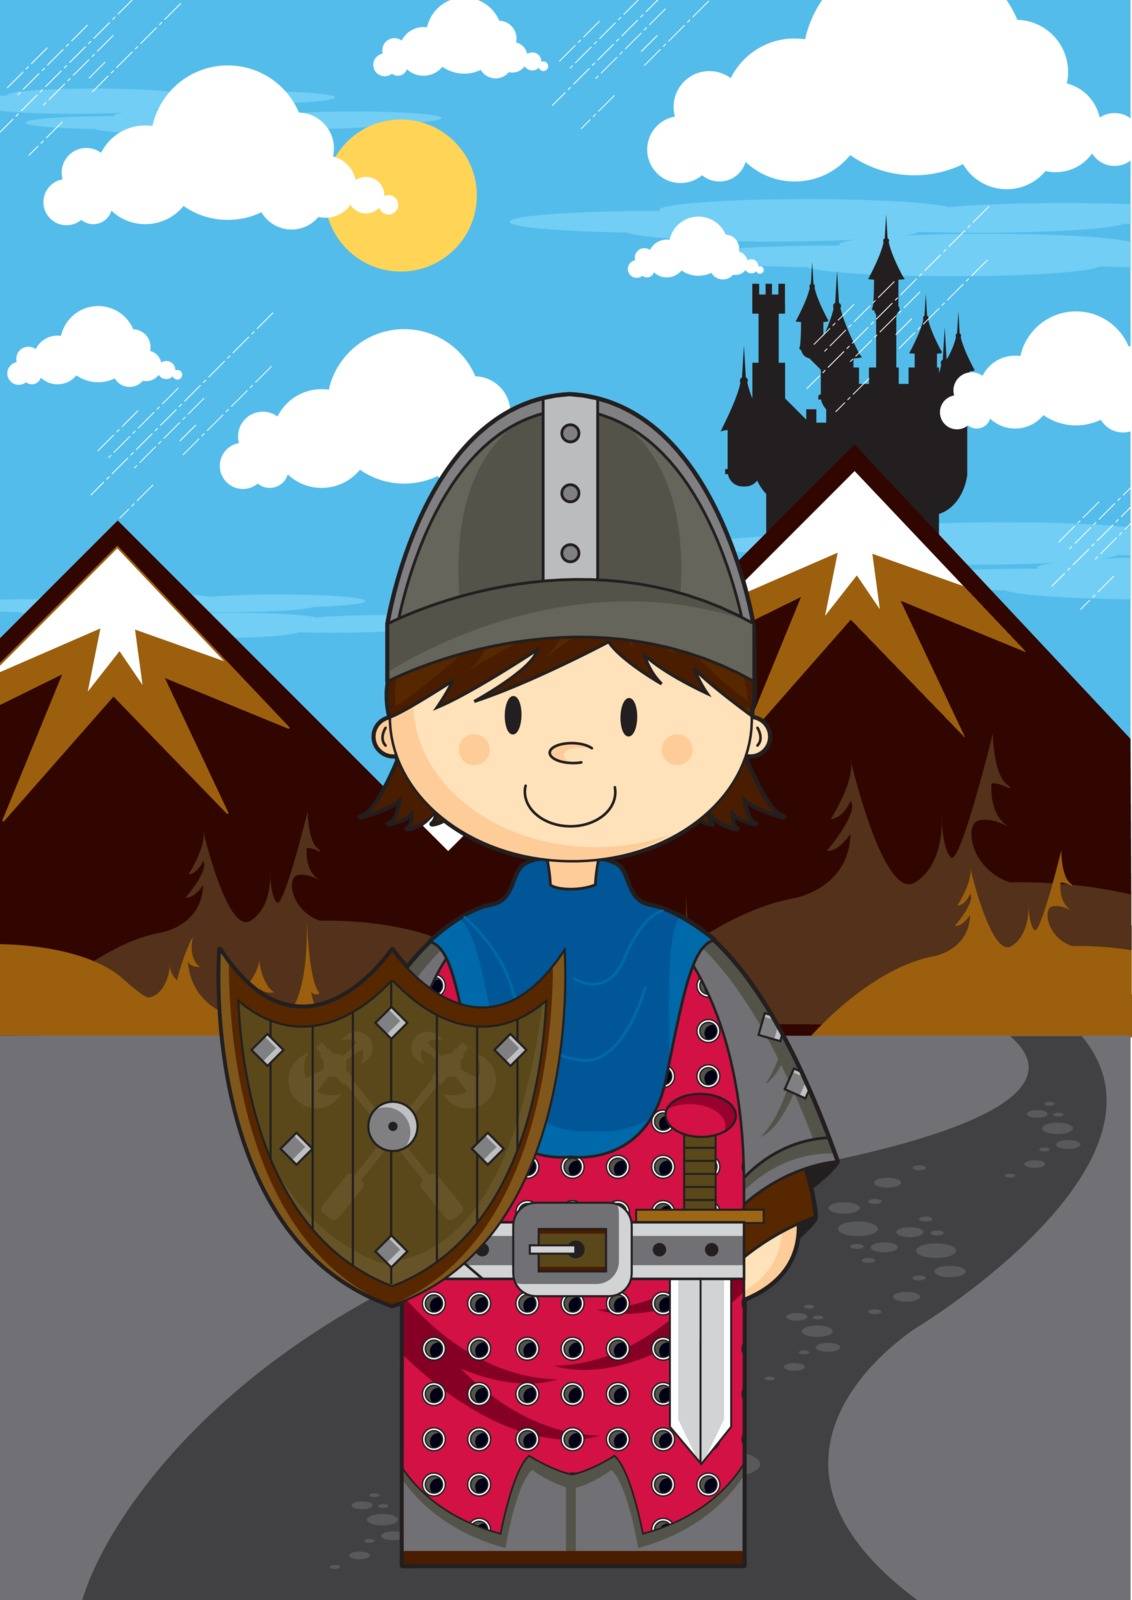 Cute Cartoon Medieval Soldier with Sword and Shield Illustration - by Mark Murphy Creative